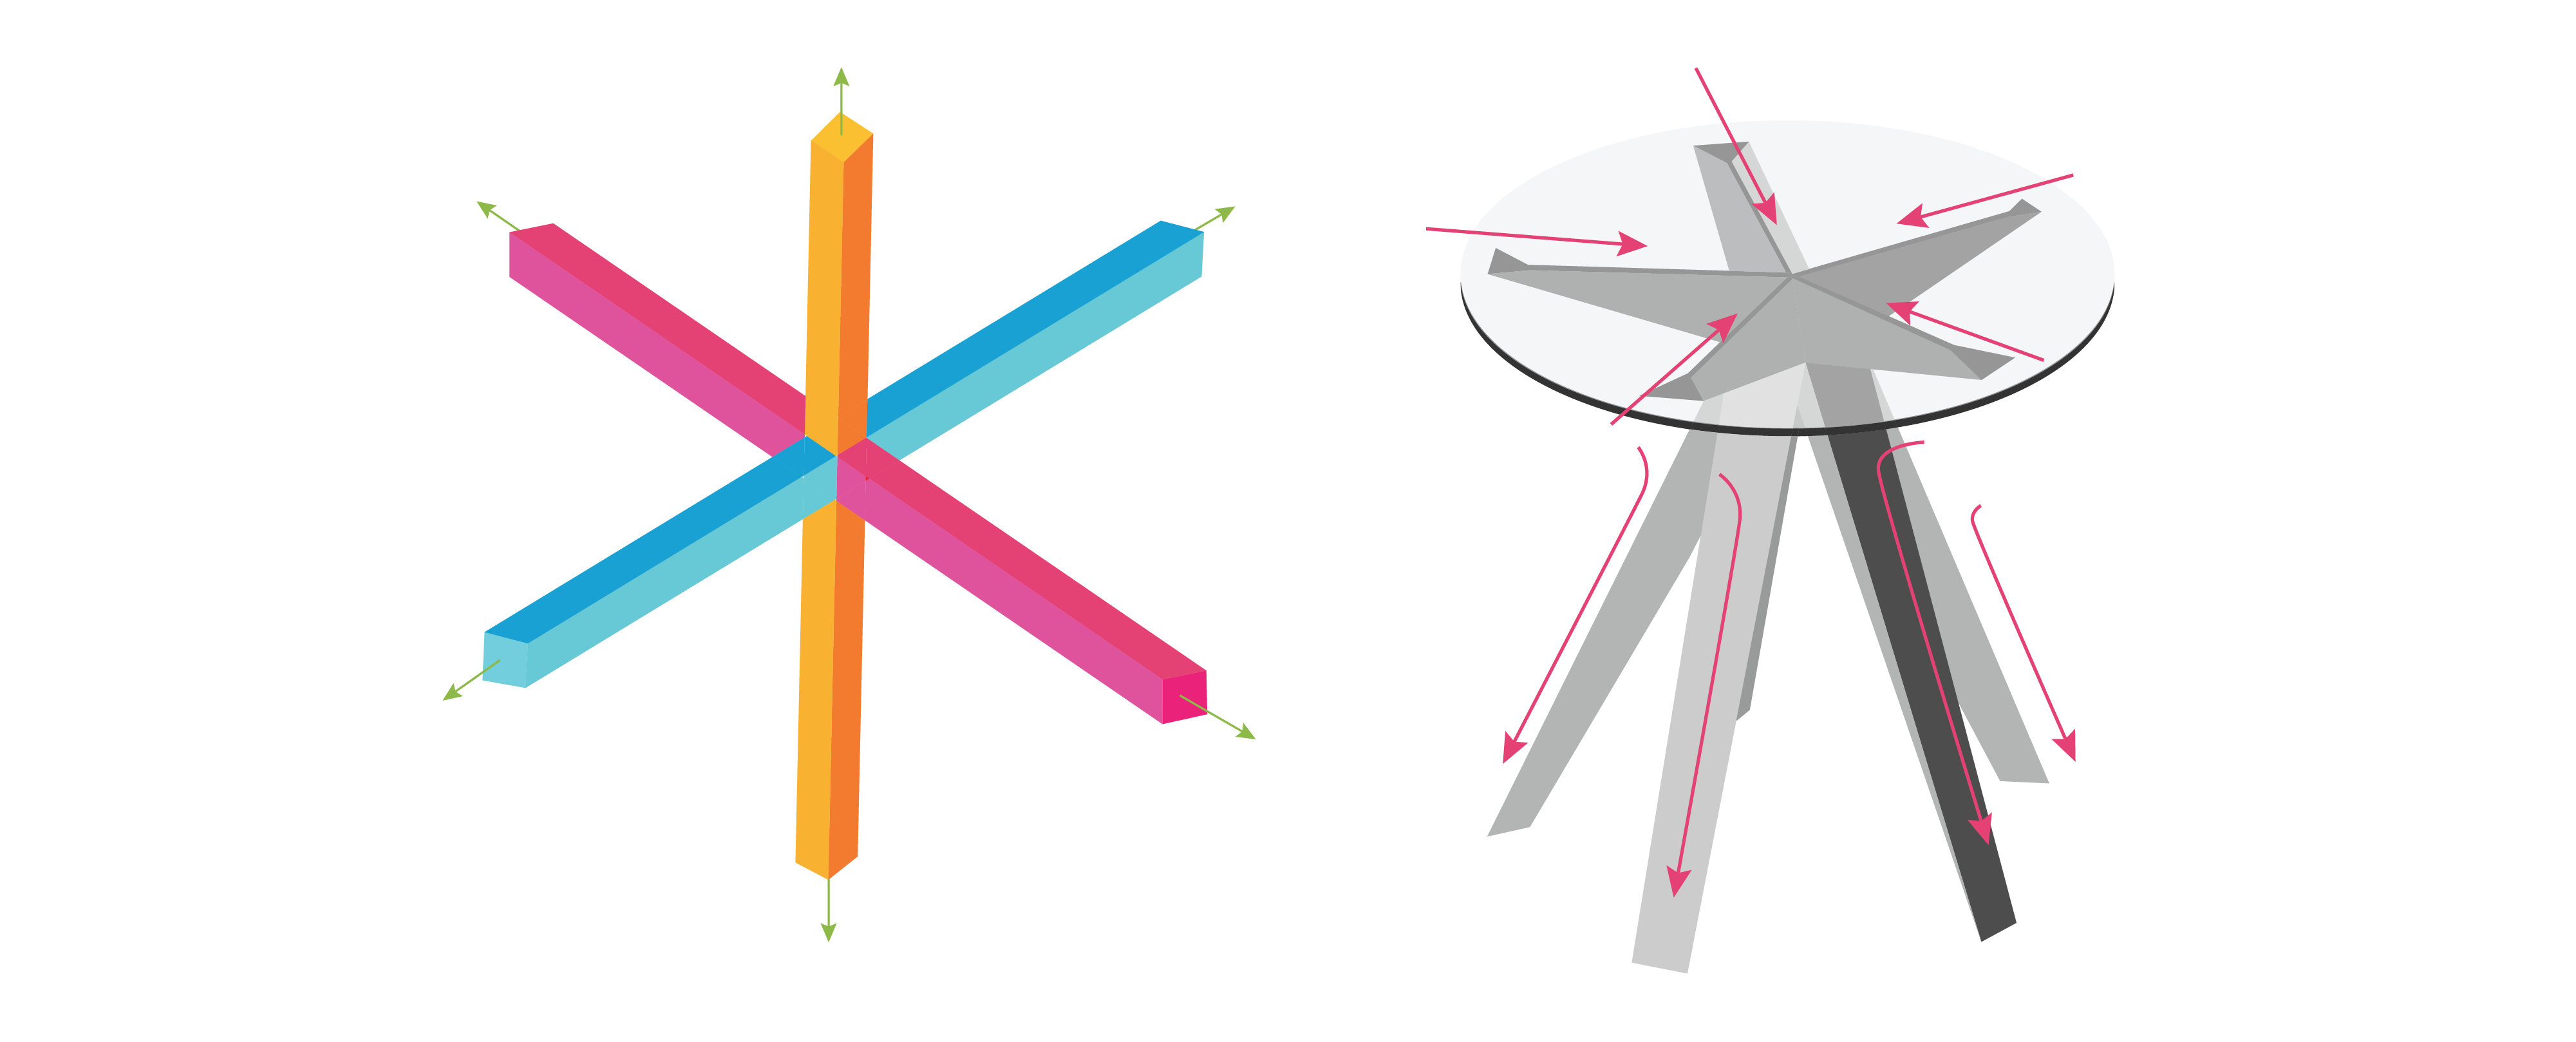 On the left is a colourful schematic illustration with 3 long, thin rectangular prisms showcasing 3 axes: length (blue), width (pink), and height (orange). On the right is a glass-topped side table with legs and supports that resemble the axes in the left image.